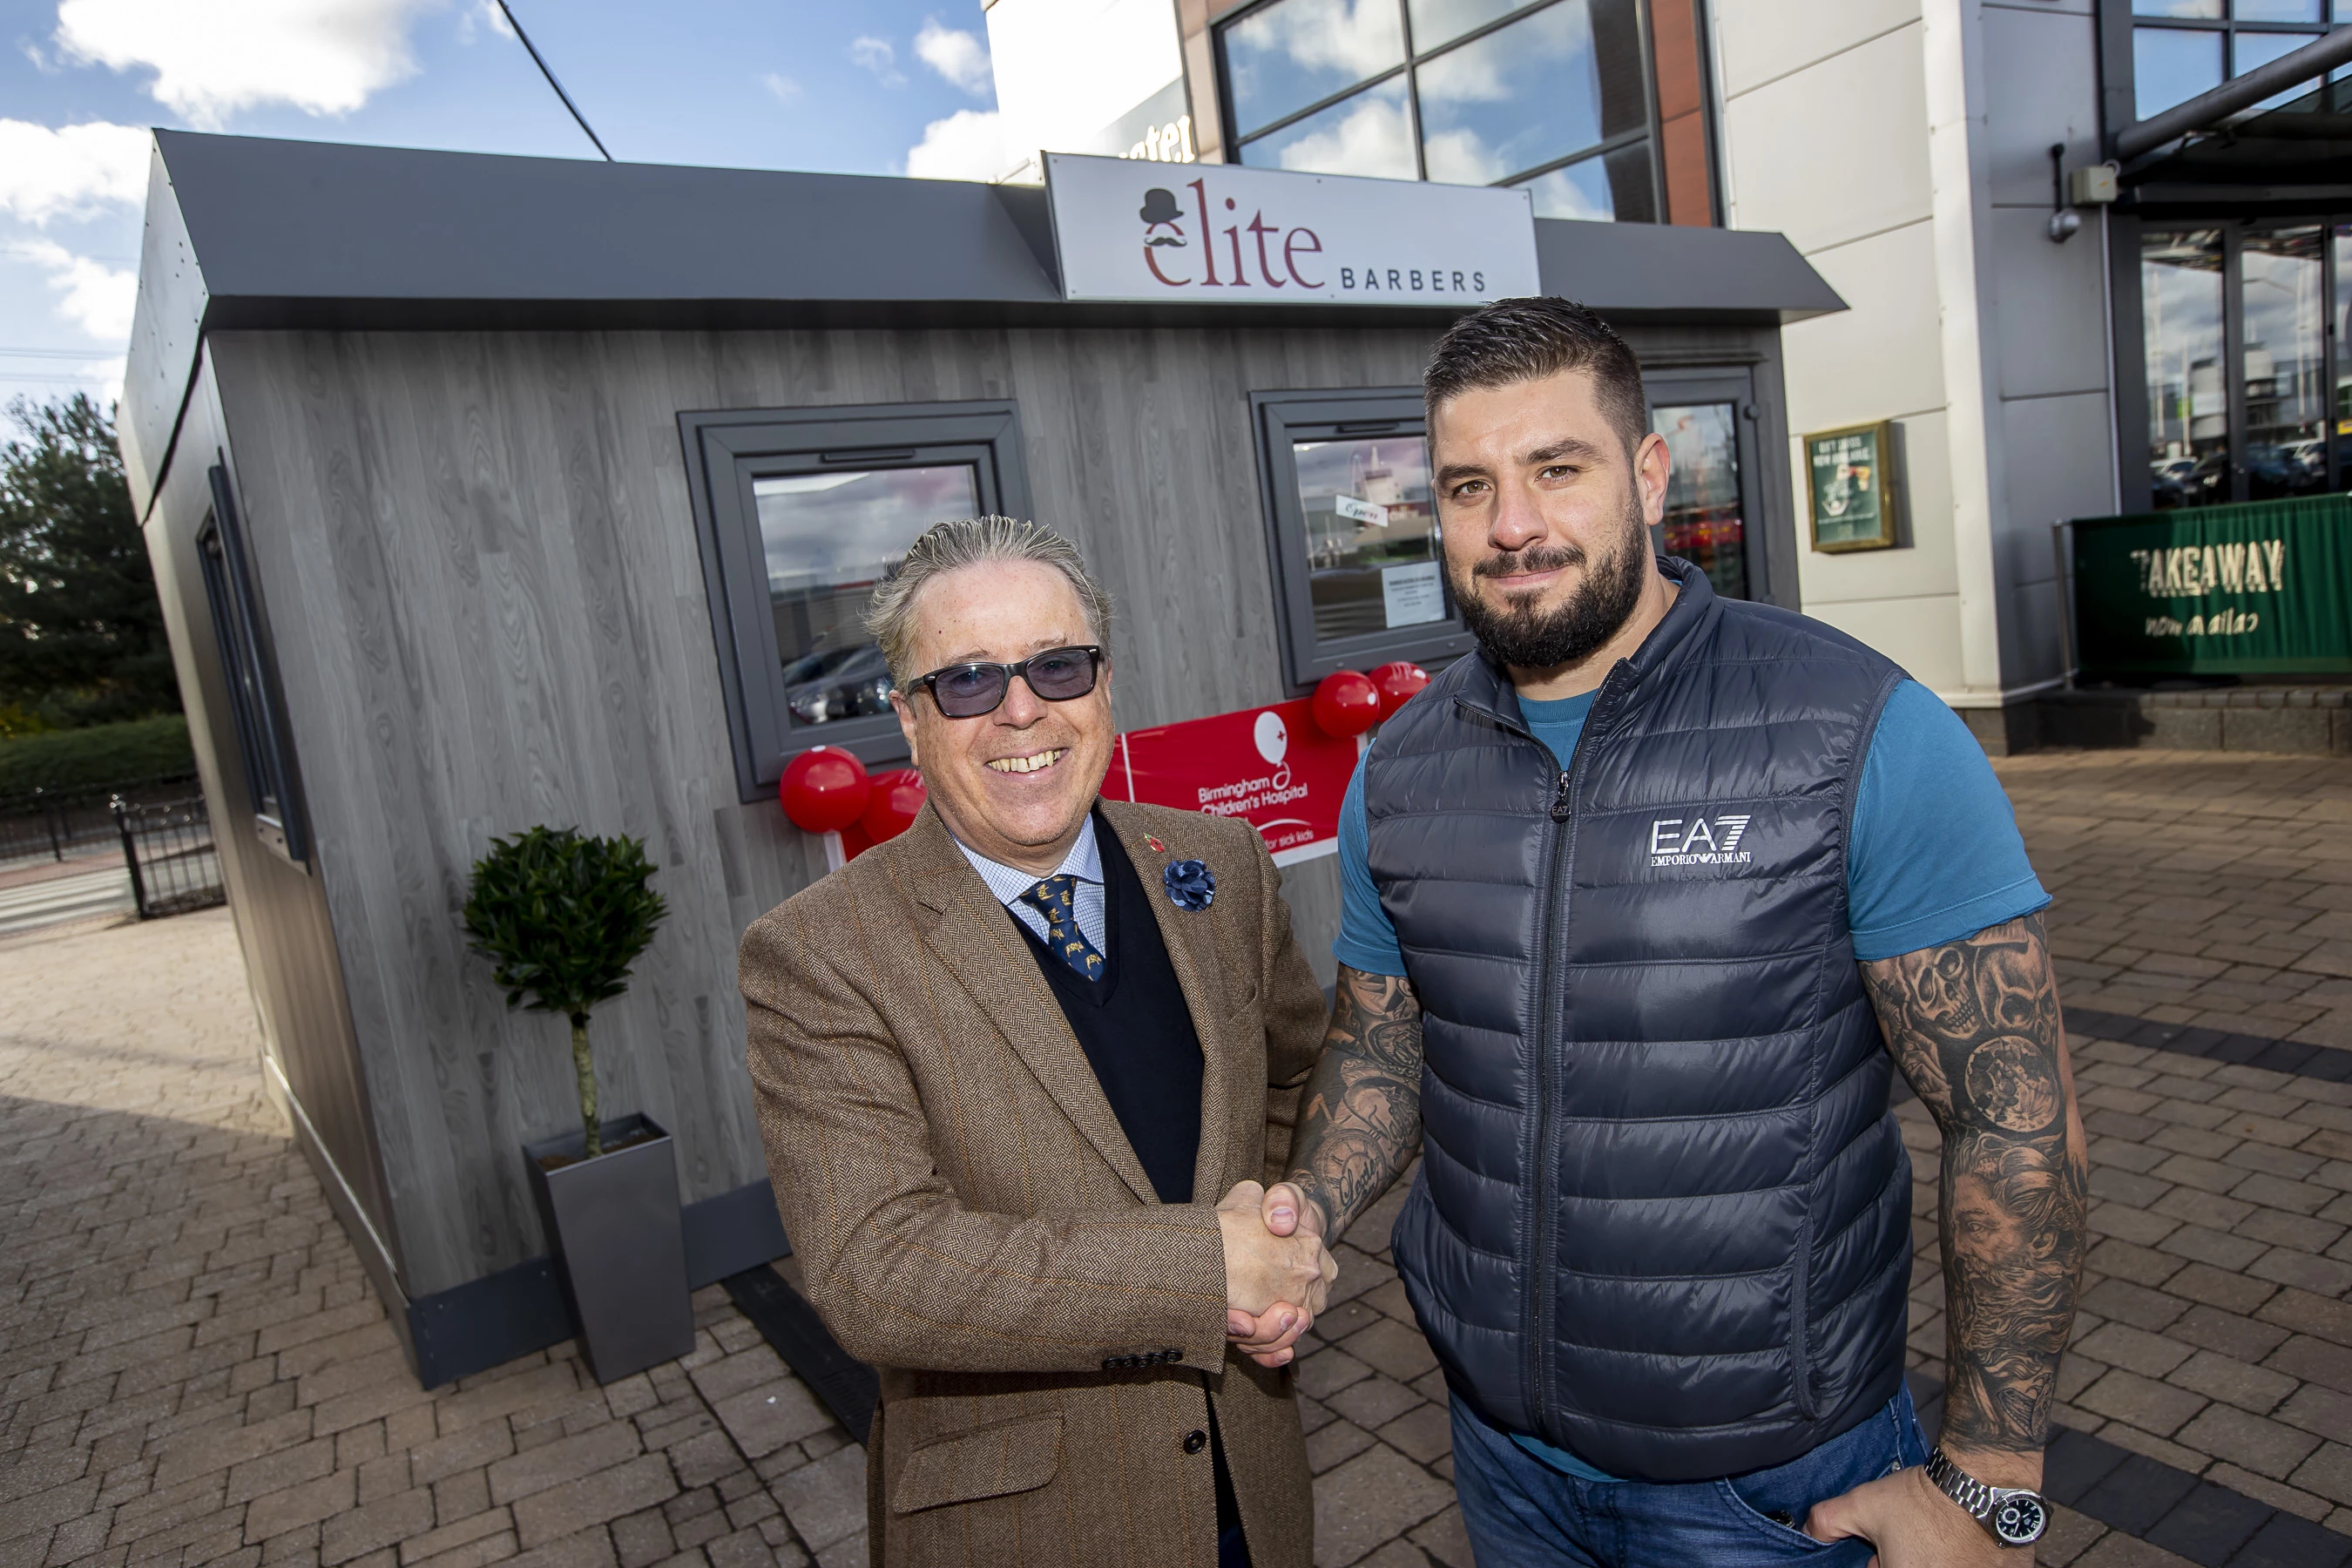 Rapid Retail MD Nick Daffern with Phil Hart from Elite Barbers